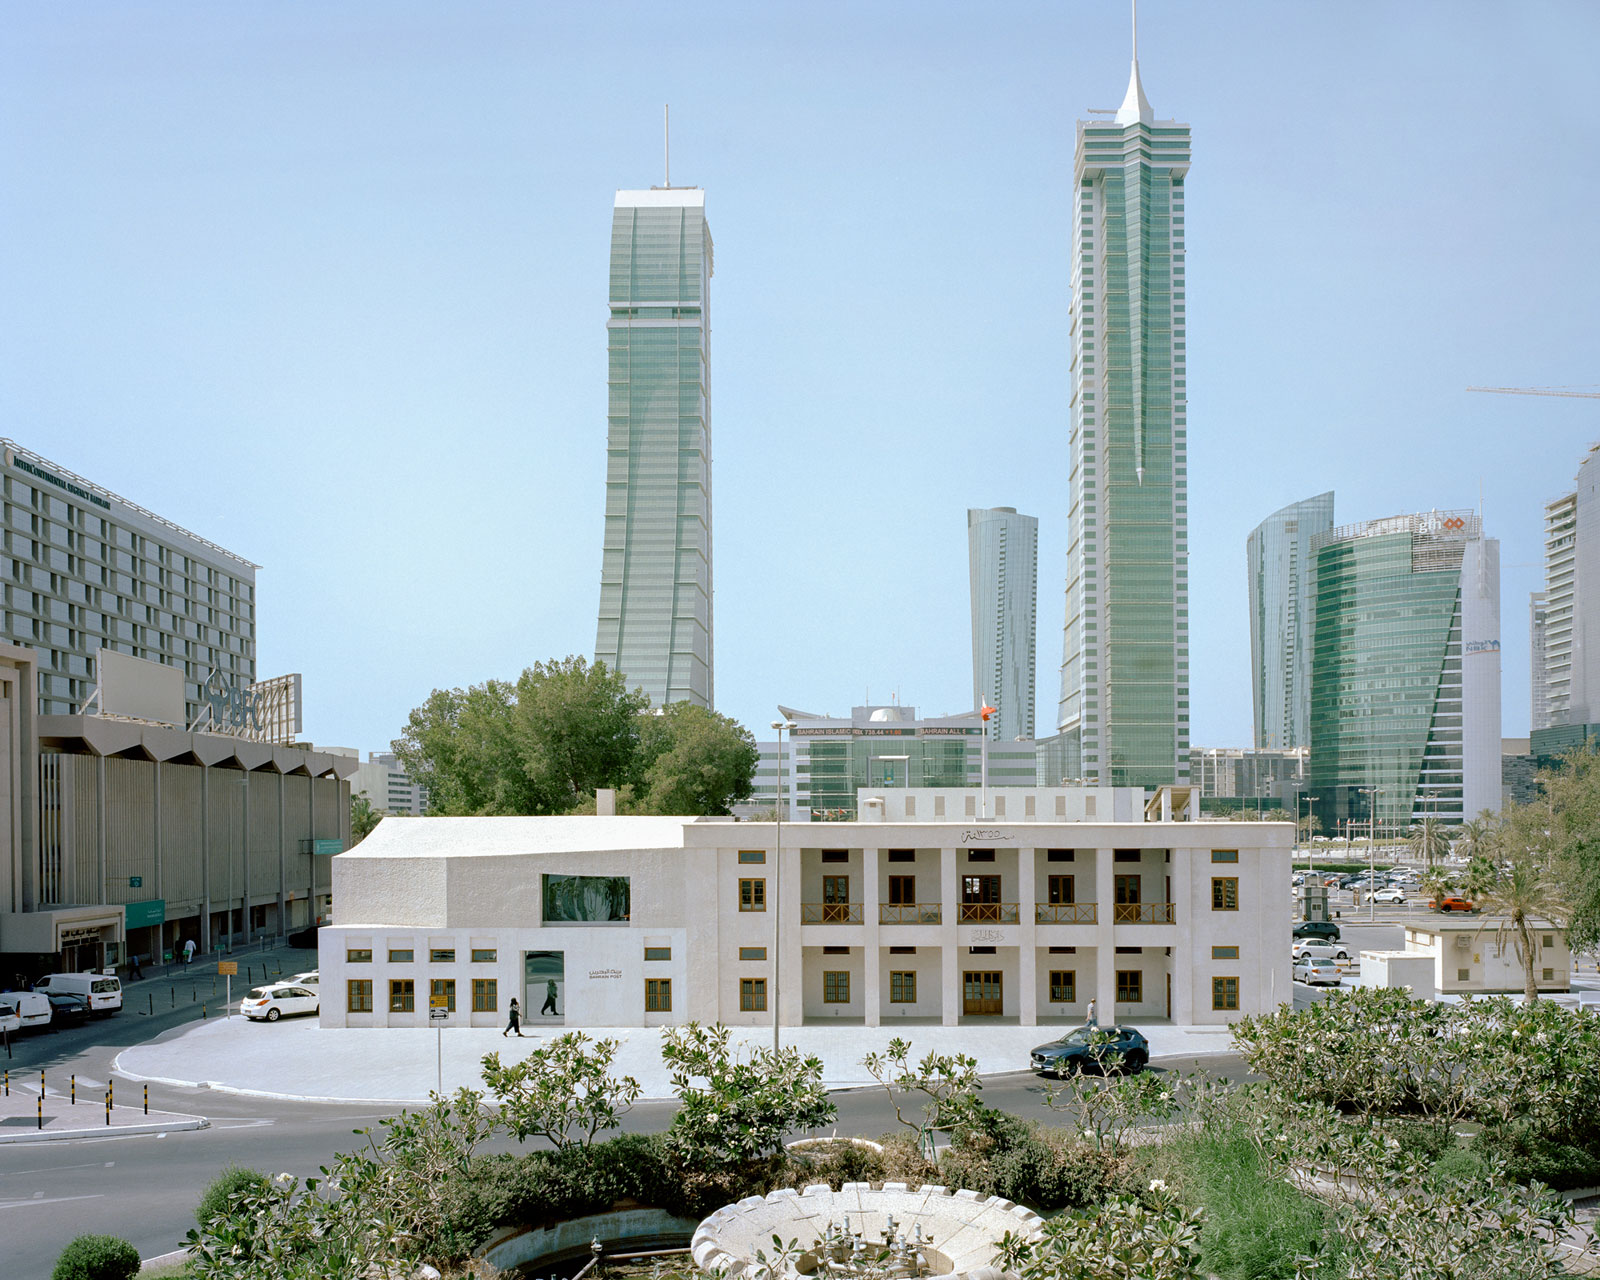 Image of 20220802 AnneHoltrop Manama 1 in Manama post office - Cosentino